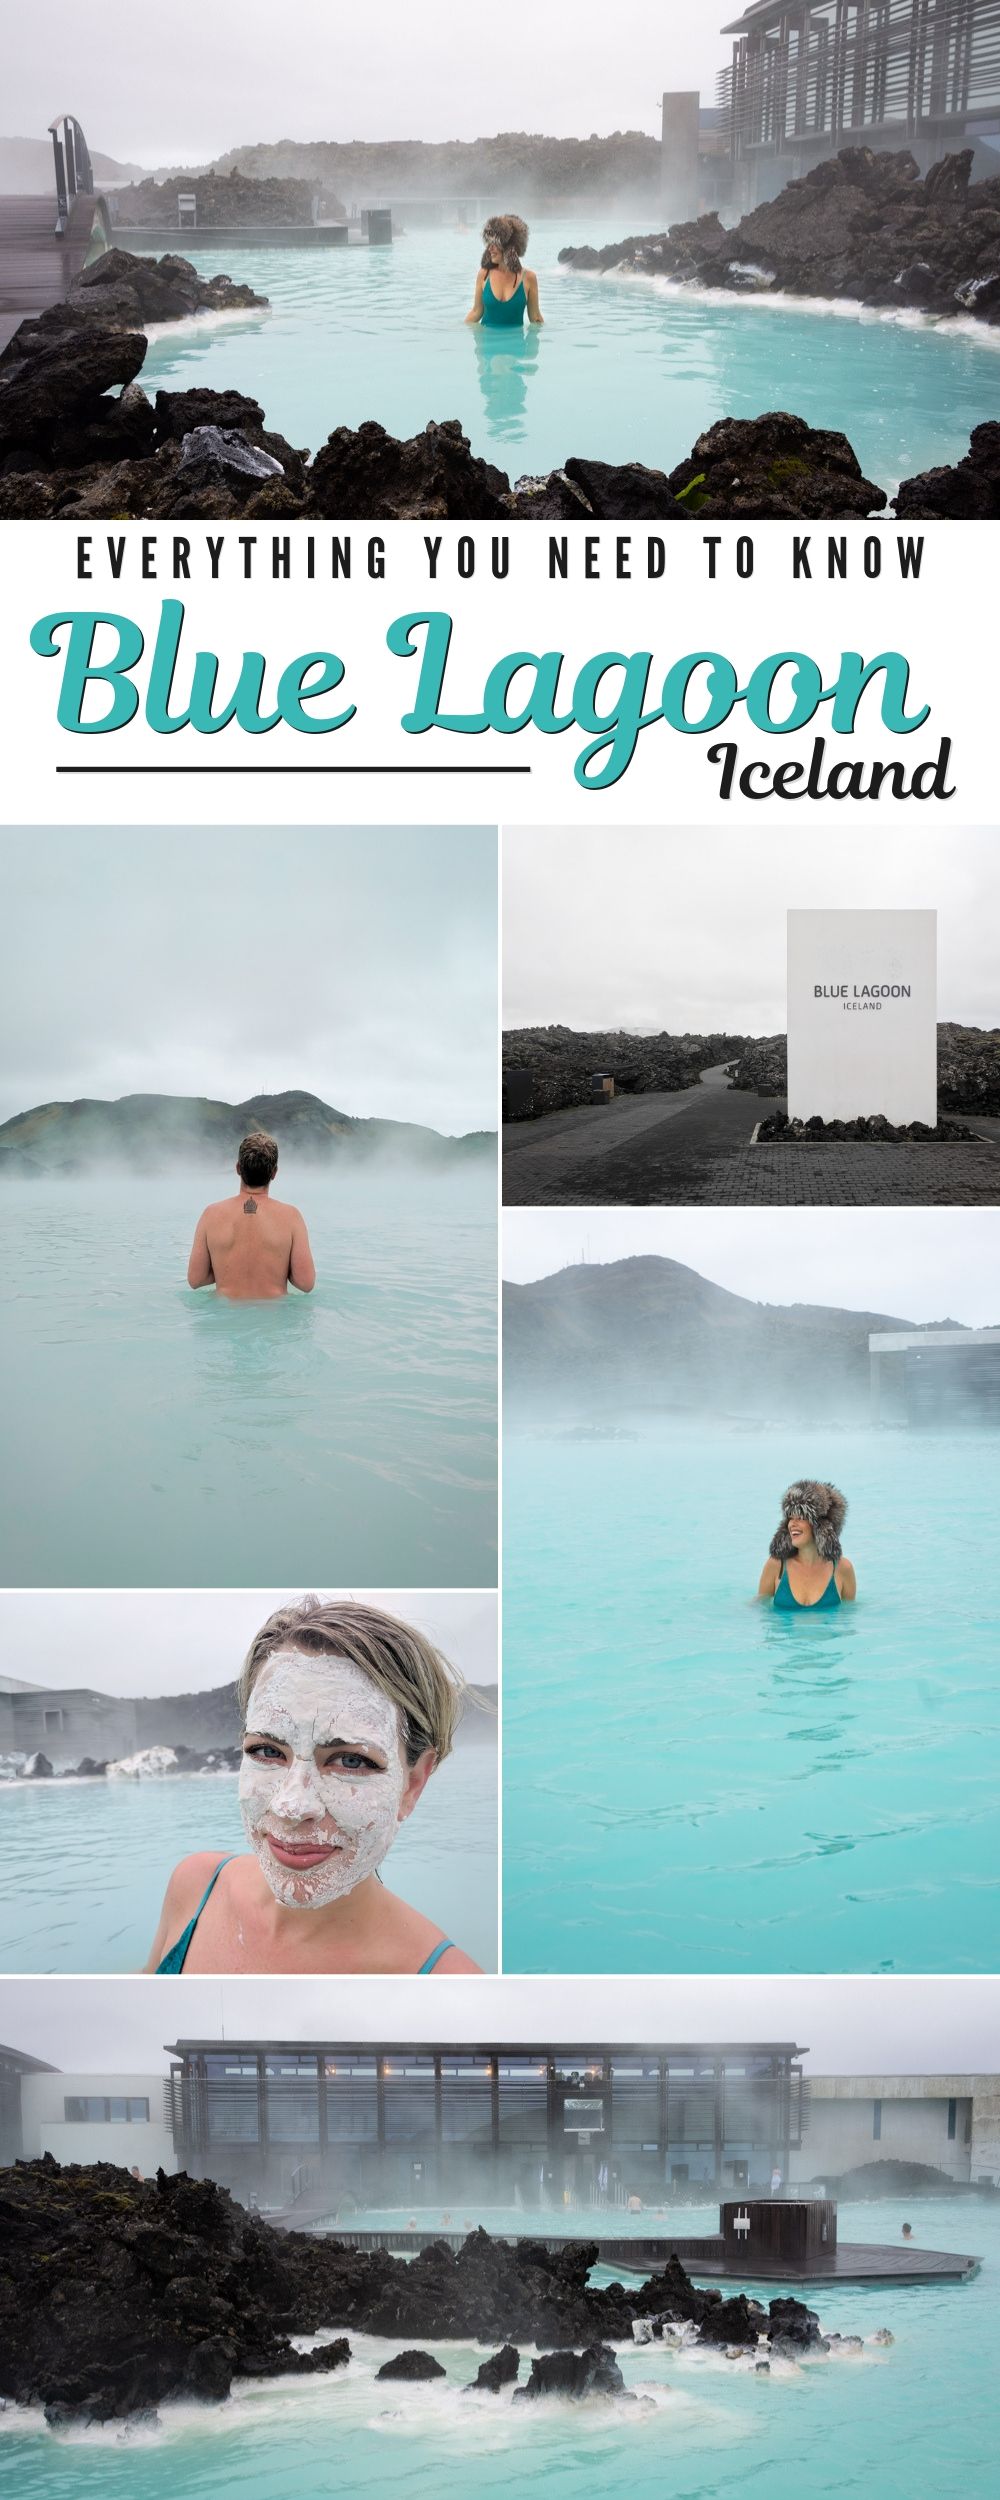 Blue Lagoon, Iceland: Everything You Need to Know